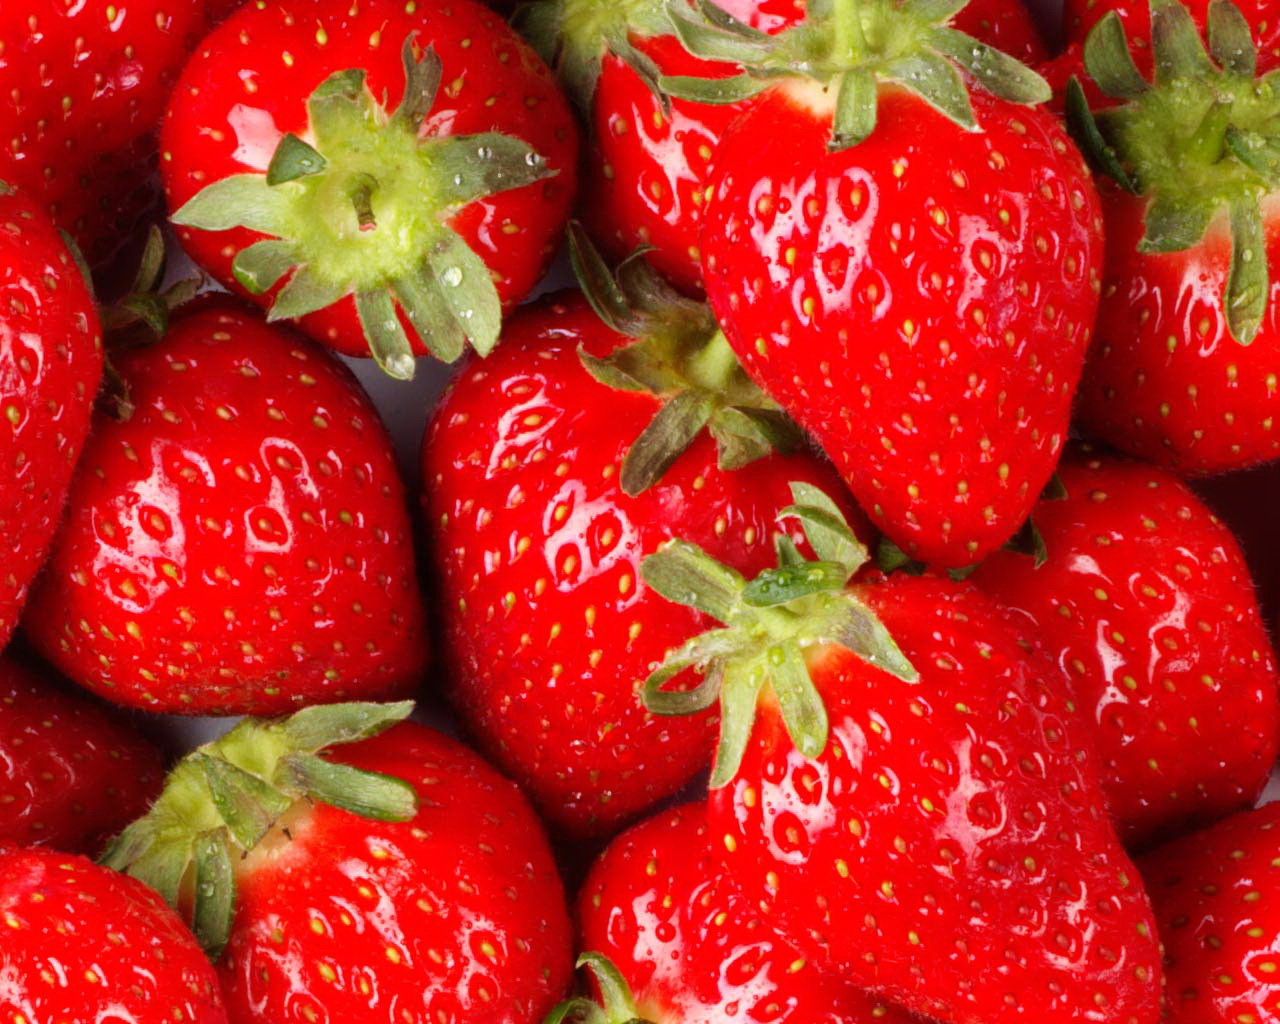 Strawberry Hd Wallpapers Backgrounds Wallpaper Page - Sweet Strawberries - HD Wallpaper 